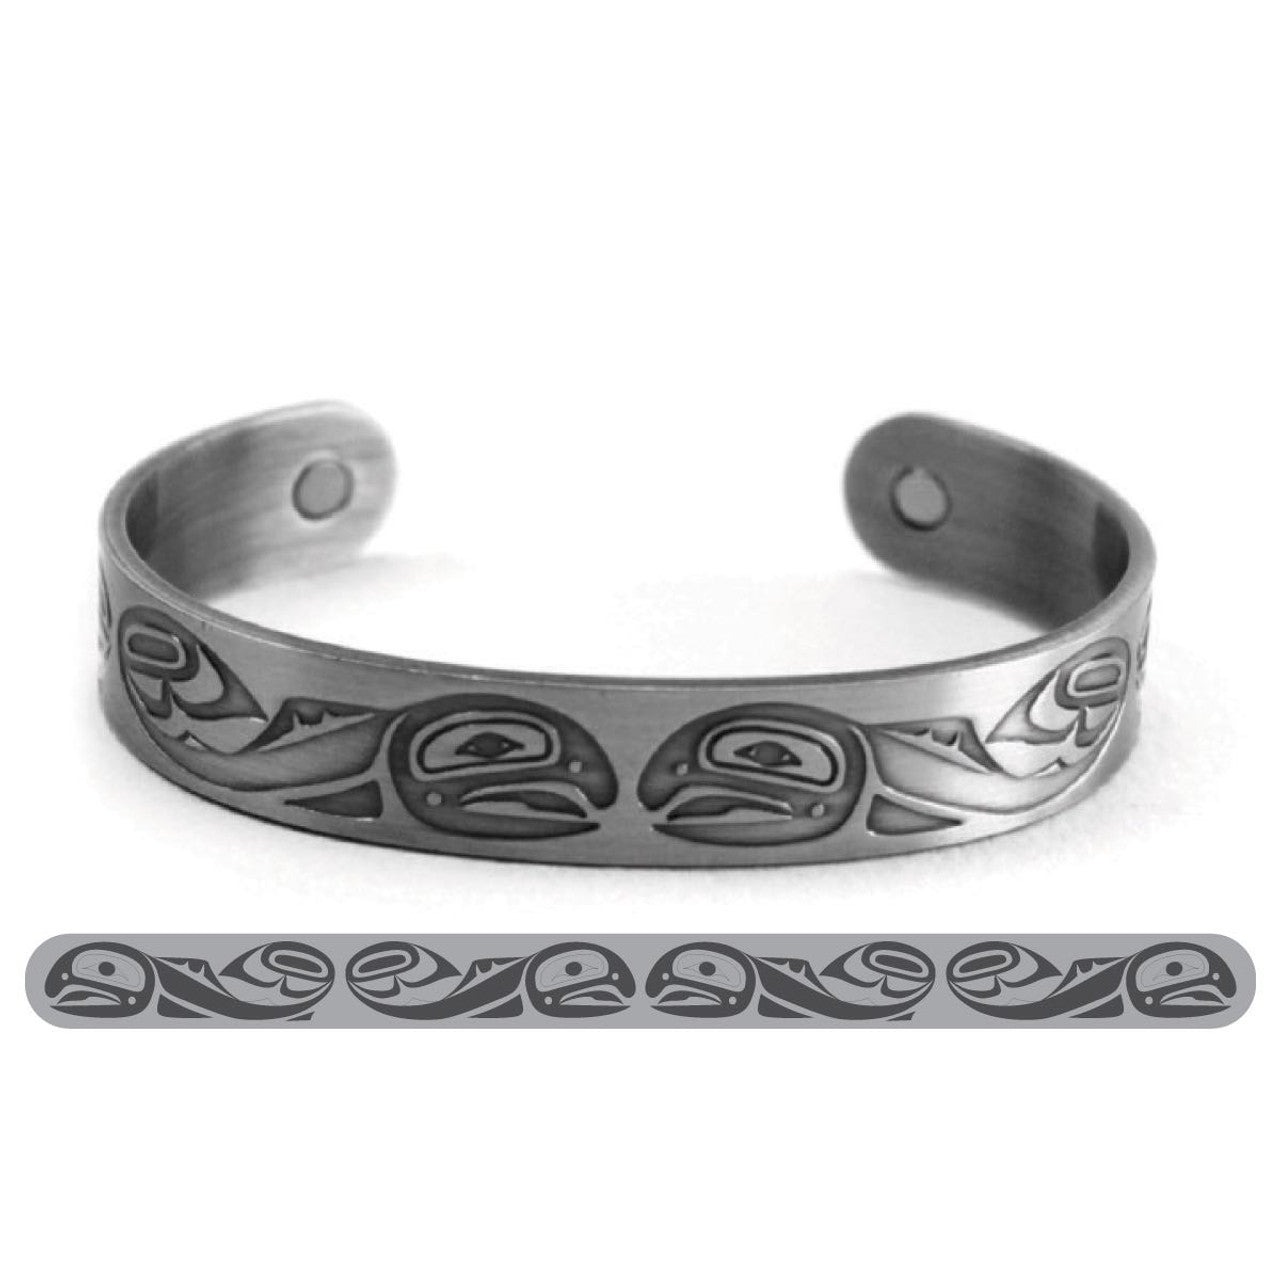 BRUSHED SILVER BRACELETS - Salmon - Abr11 - House of Himwitsa Native Art Gallery and Gifts